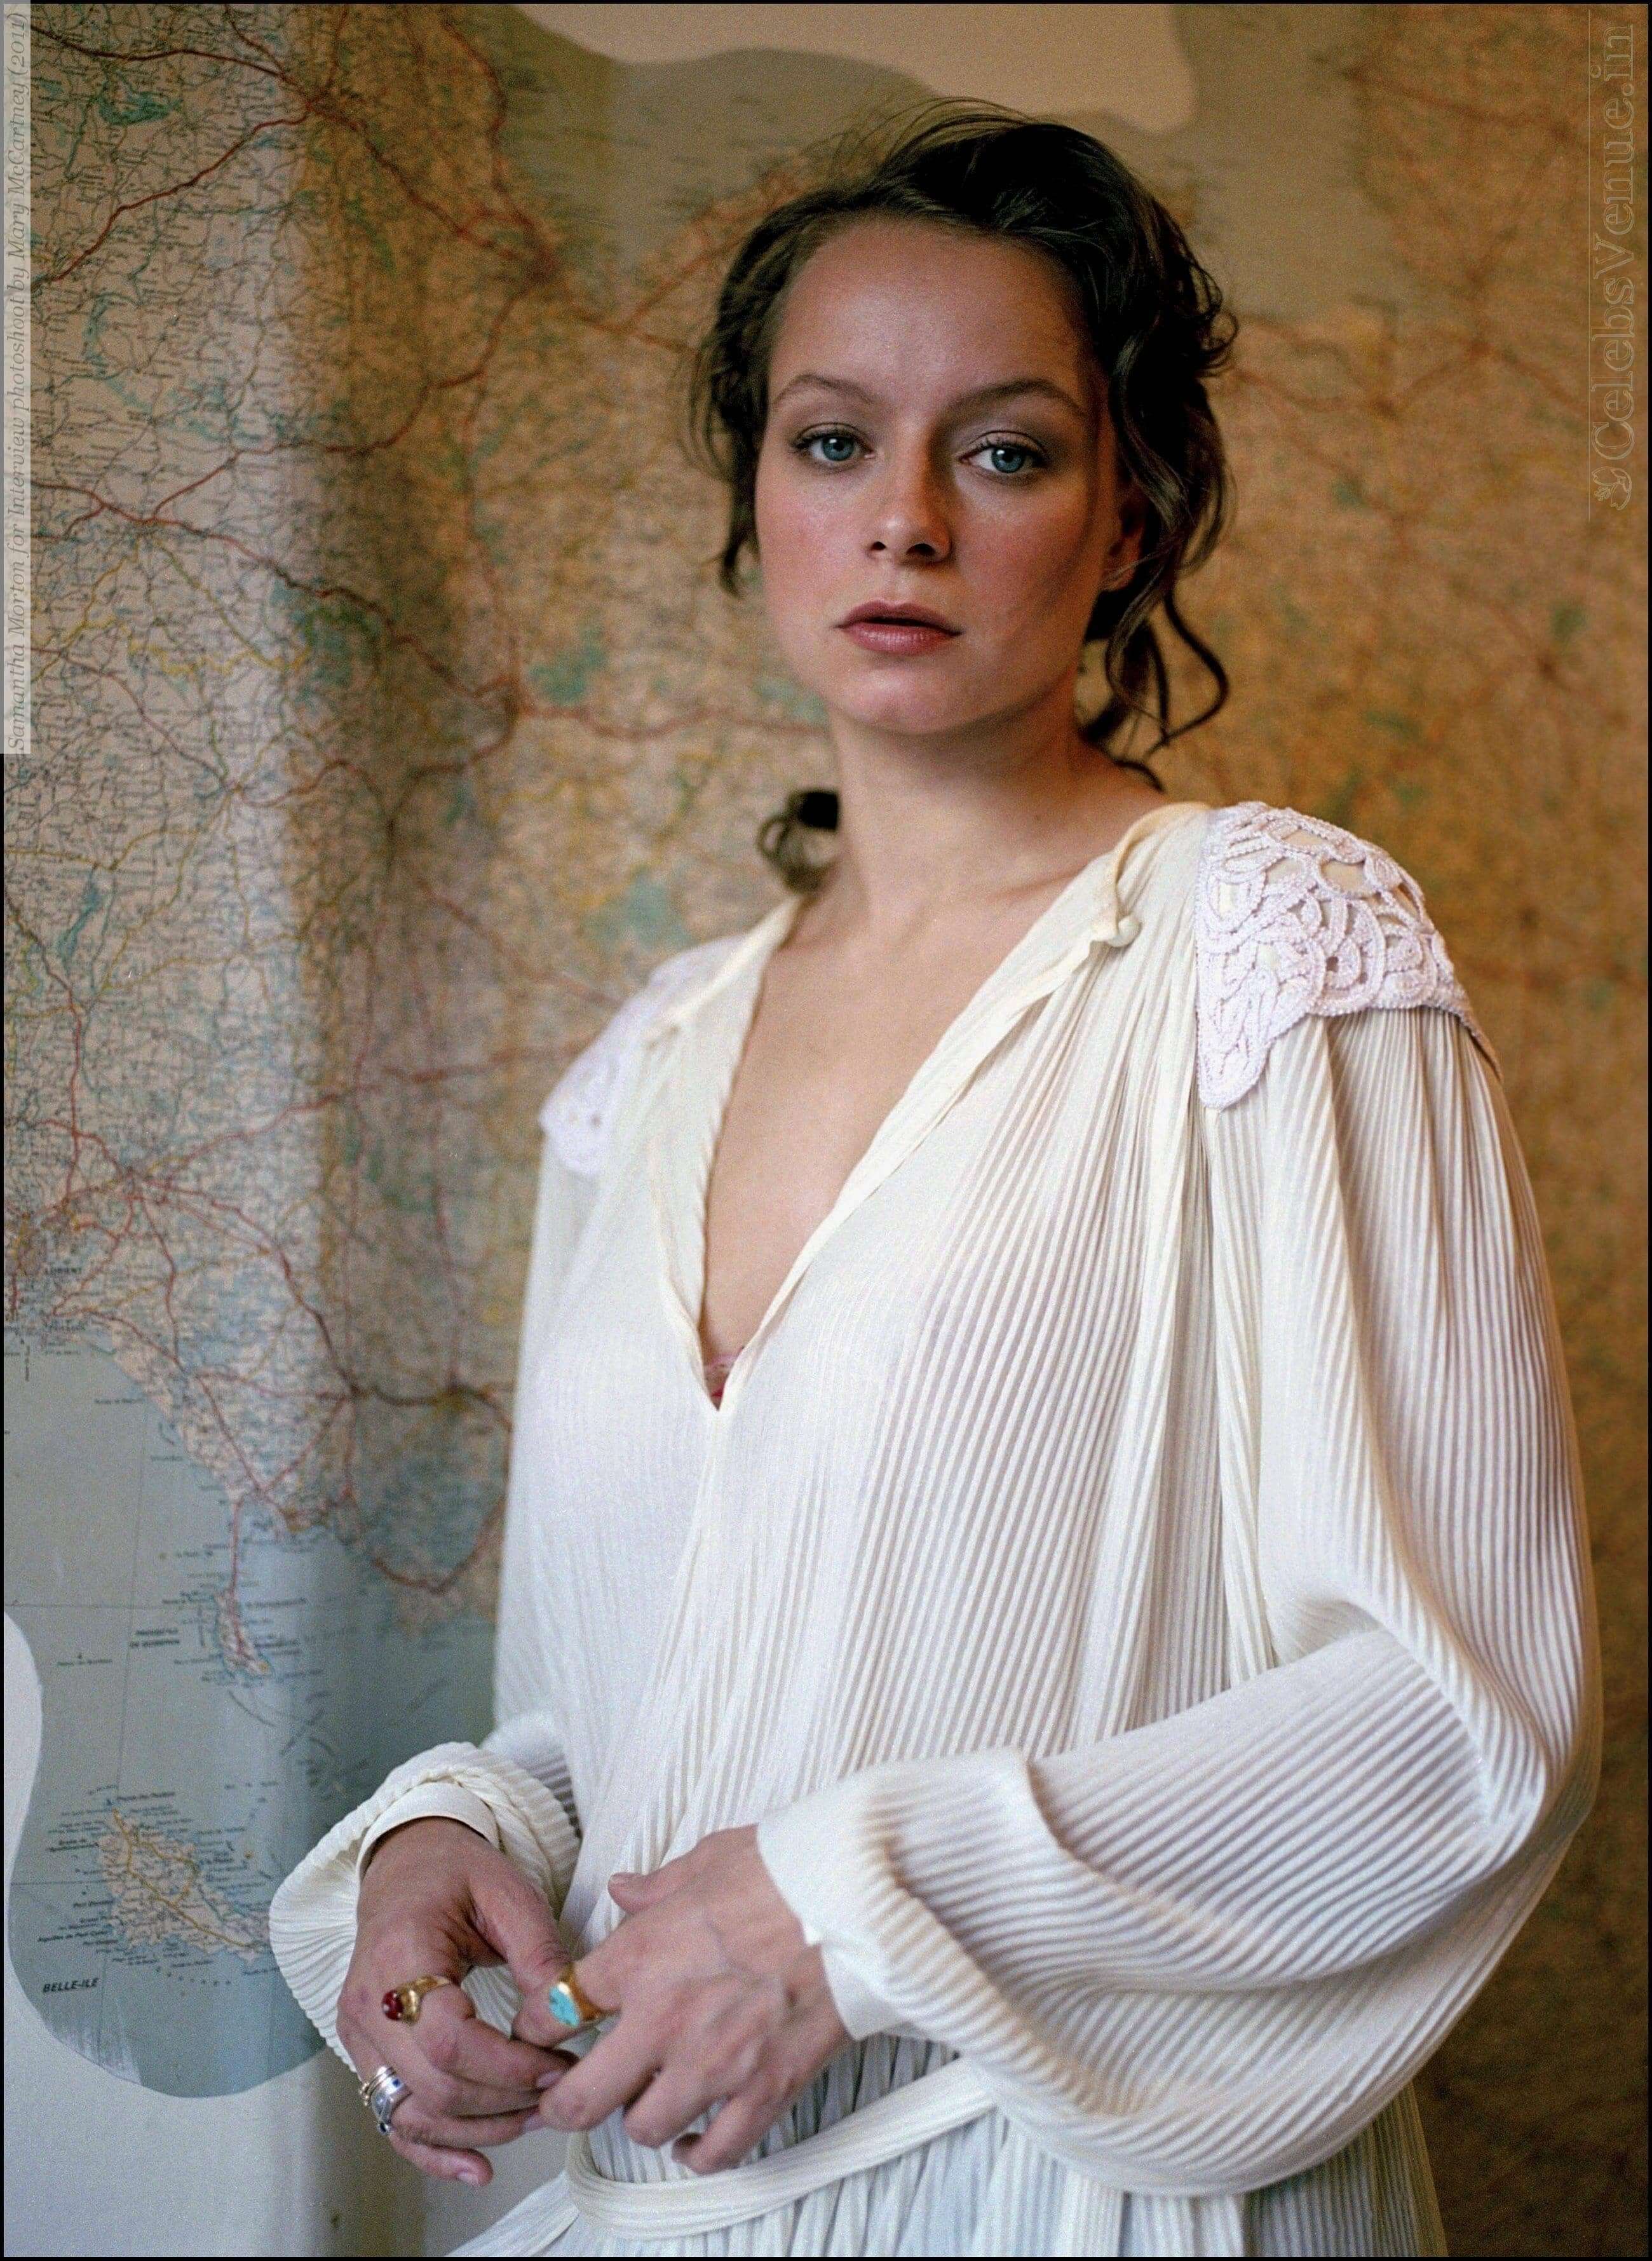 Hot Picture Of Samantha Morton Will Make You Want Her Now